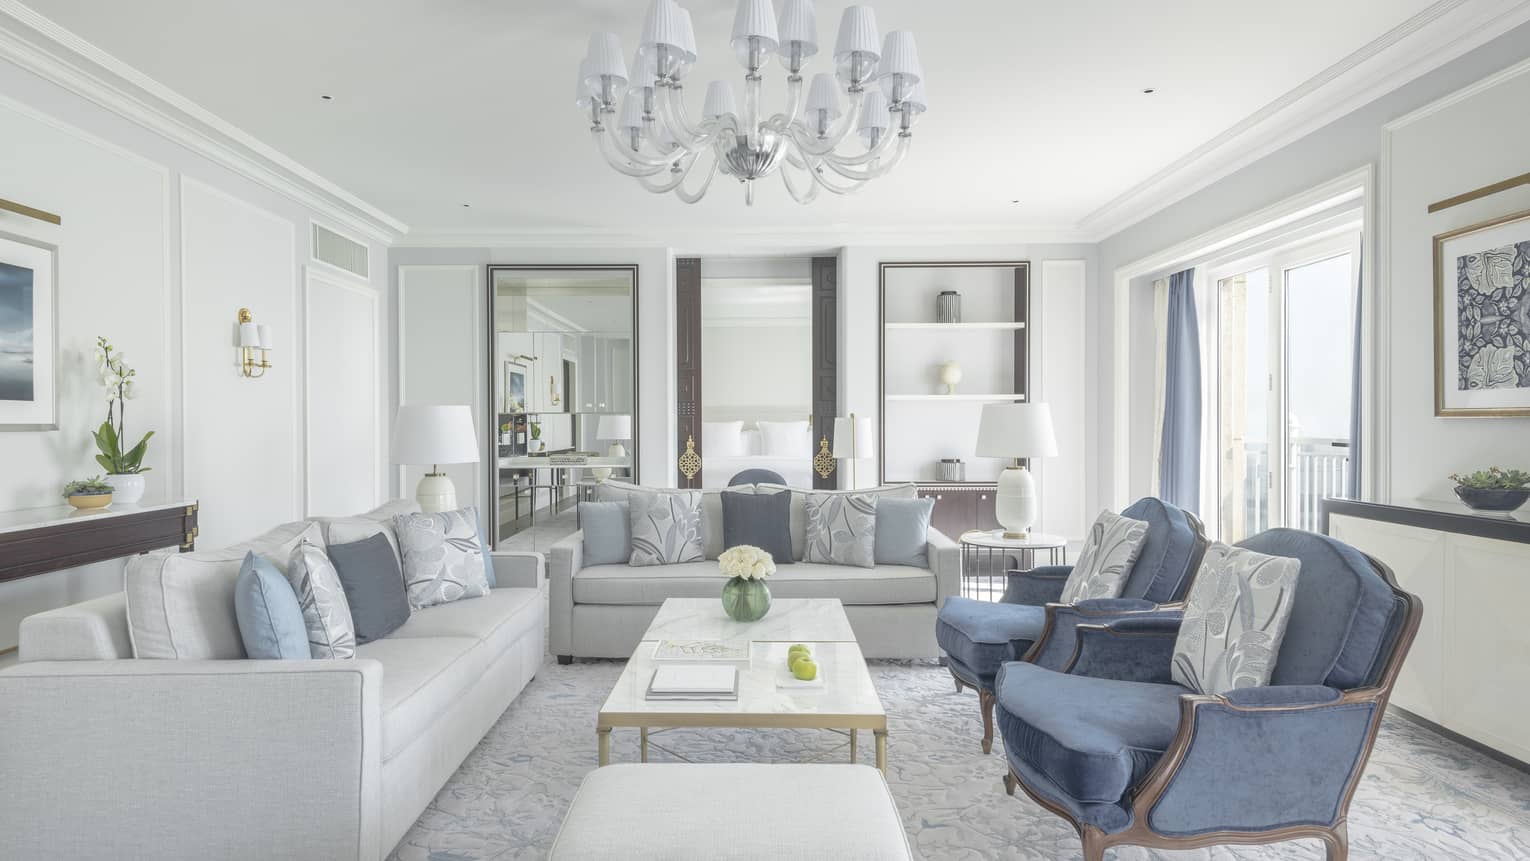 Elegant living room with two light great sofas, two blue arm chairs and white chandelier